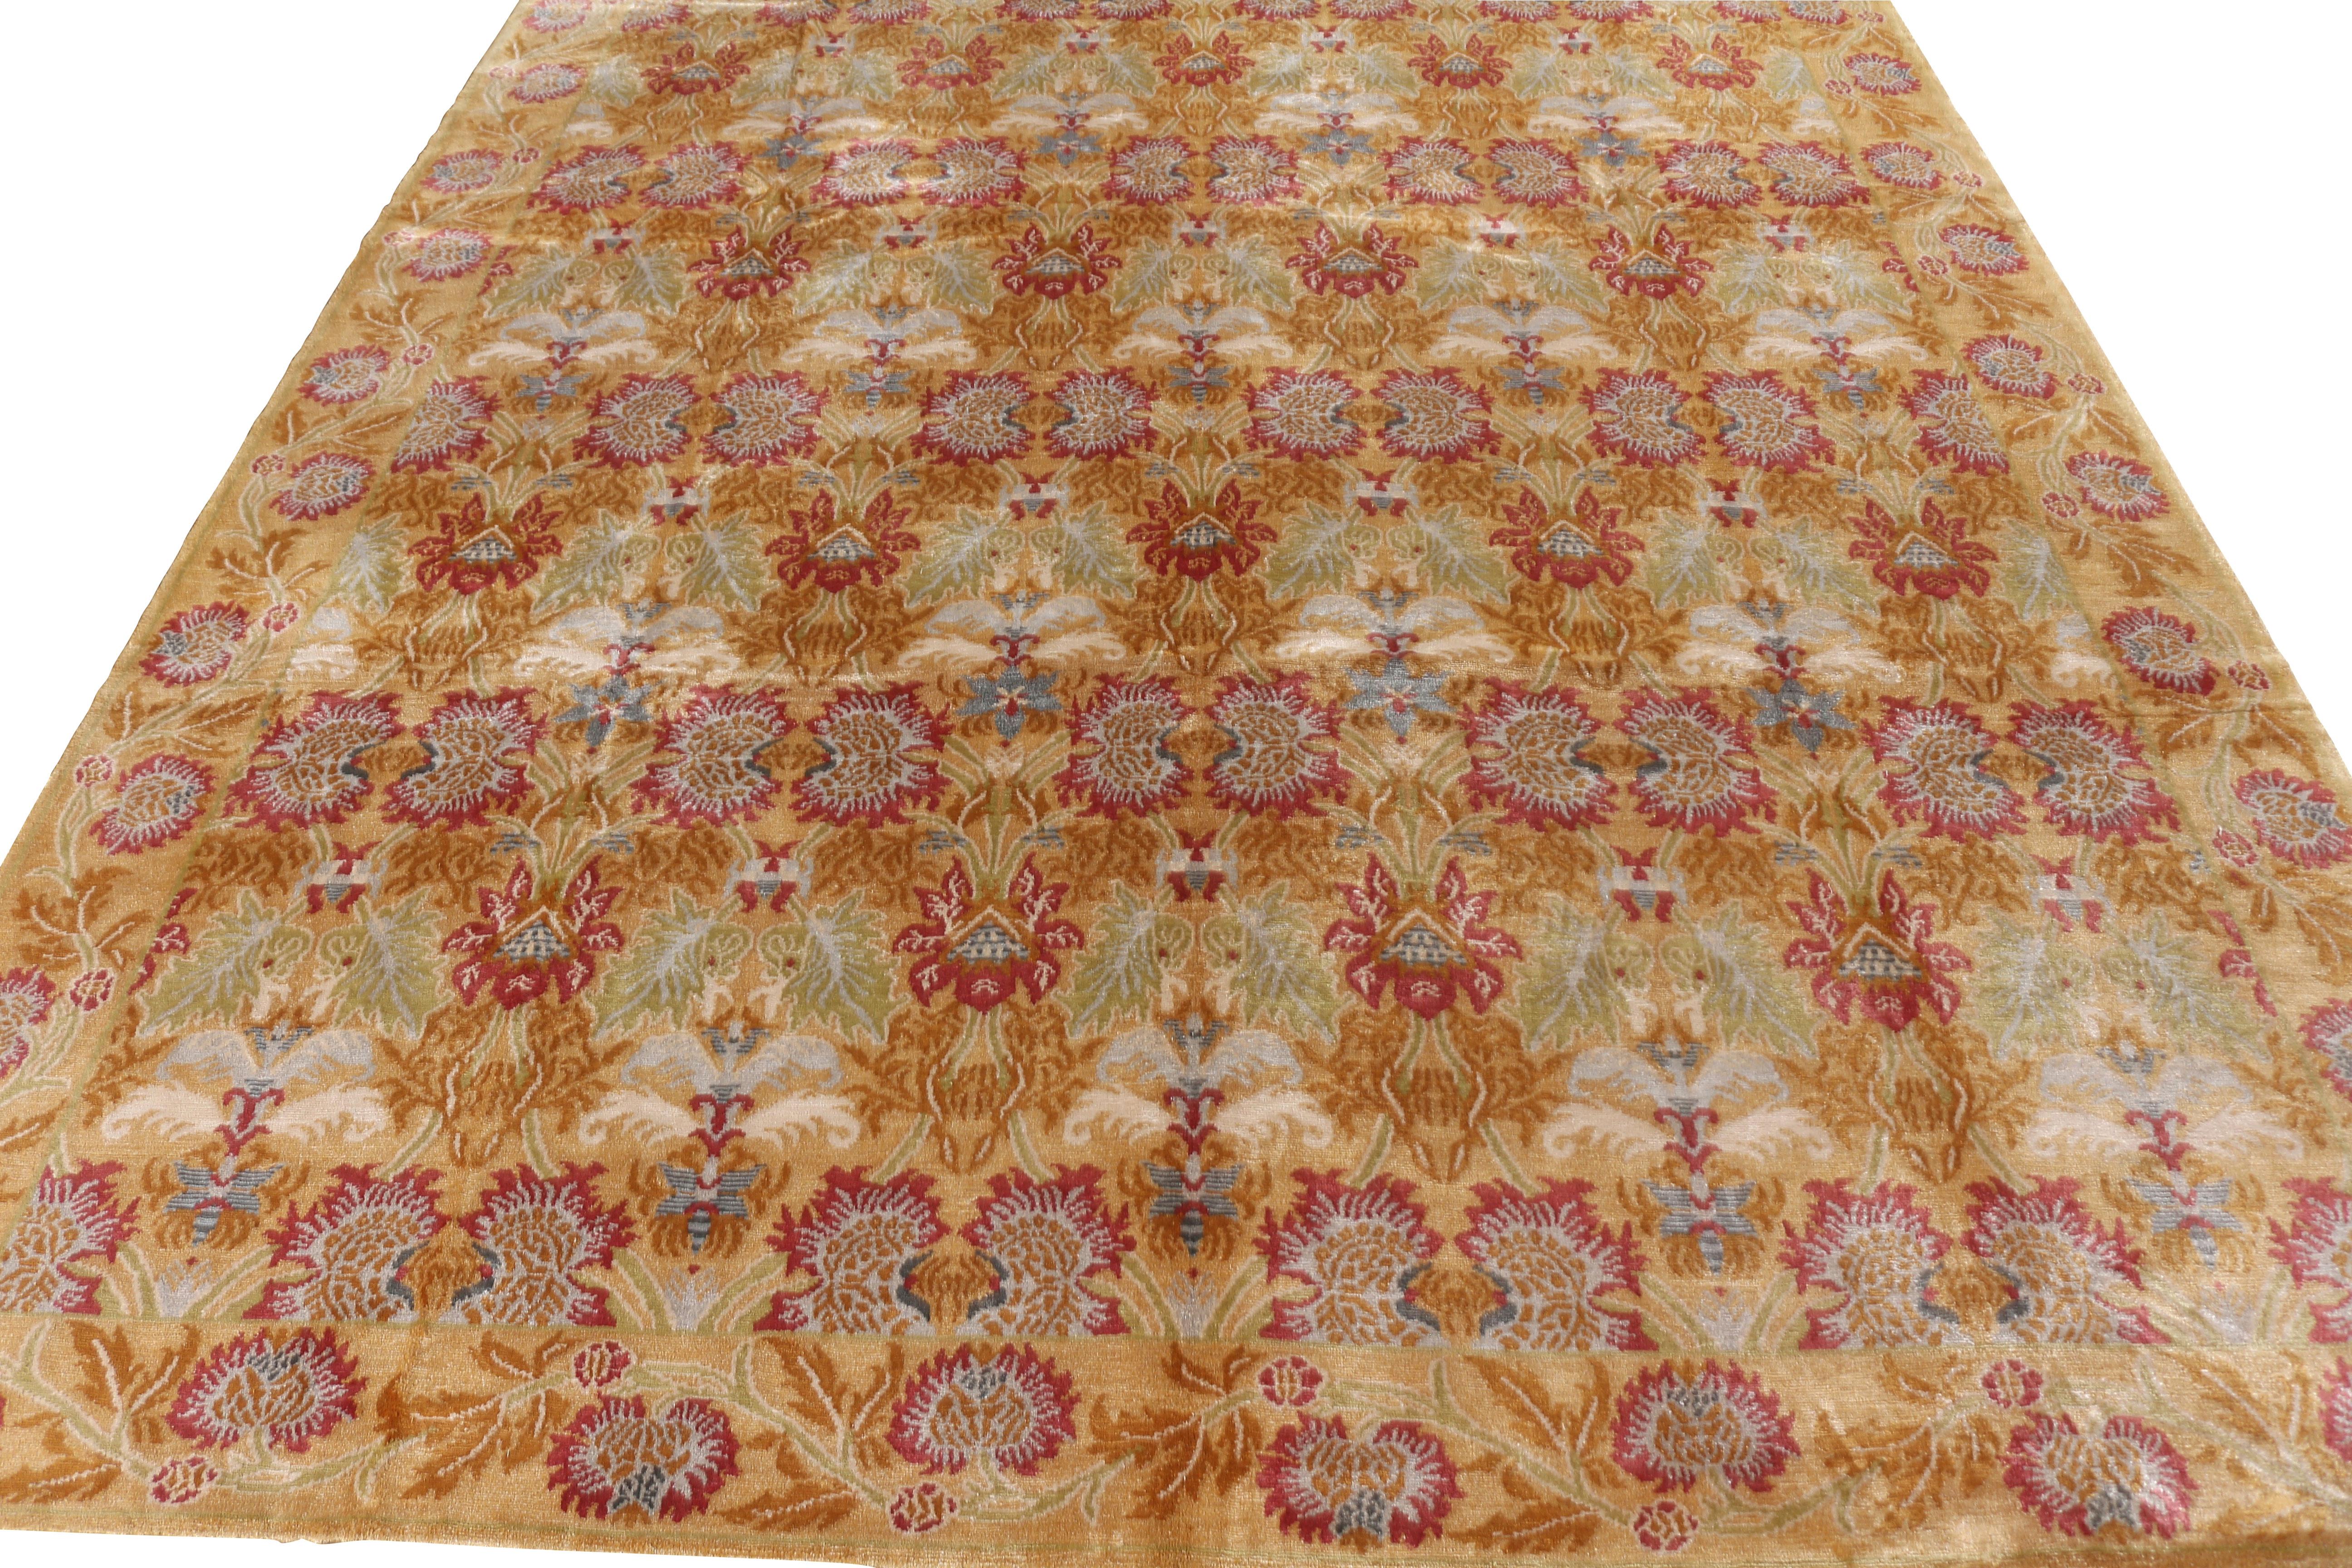 Hand knotted in lustrous silk, this floral rug marks an addition to the European Collection by Rug & Kilim, a design of Spanish rug influence affectionately dubbed “Toledo” per the inspiration. The play of the regal gold and red hues with the more